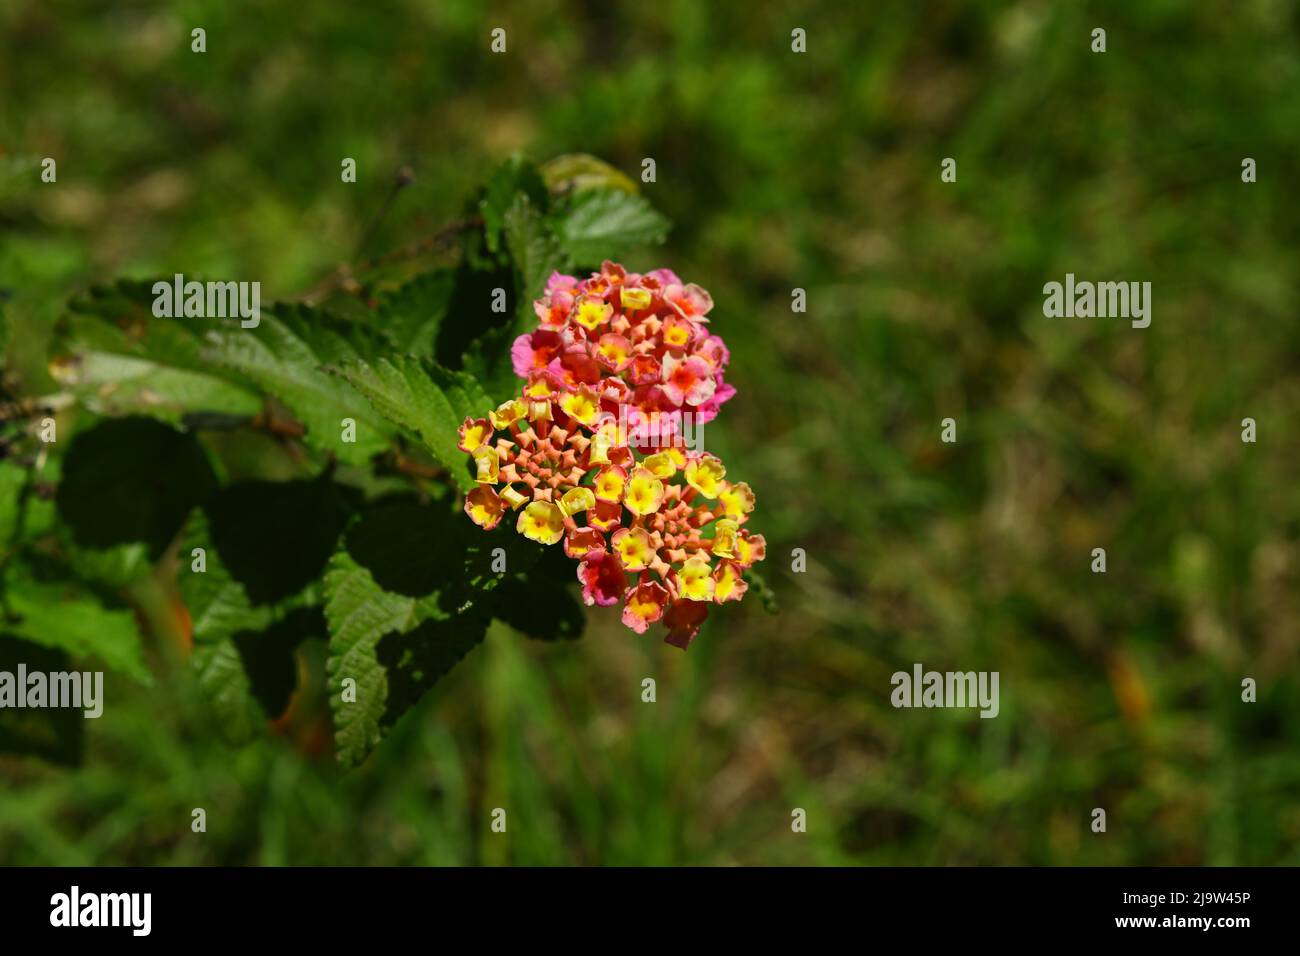 Lantana plant  in the Family Verbenaceae grows in wild in Florida, attracts butterflies, but is poisonous. Stock Photo